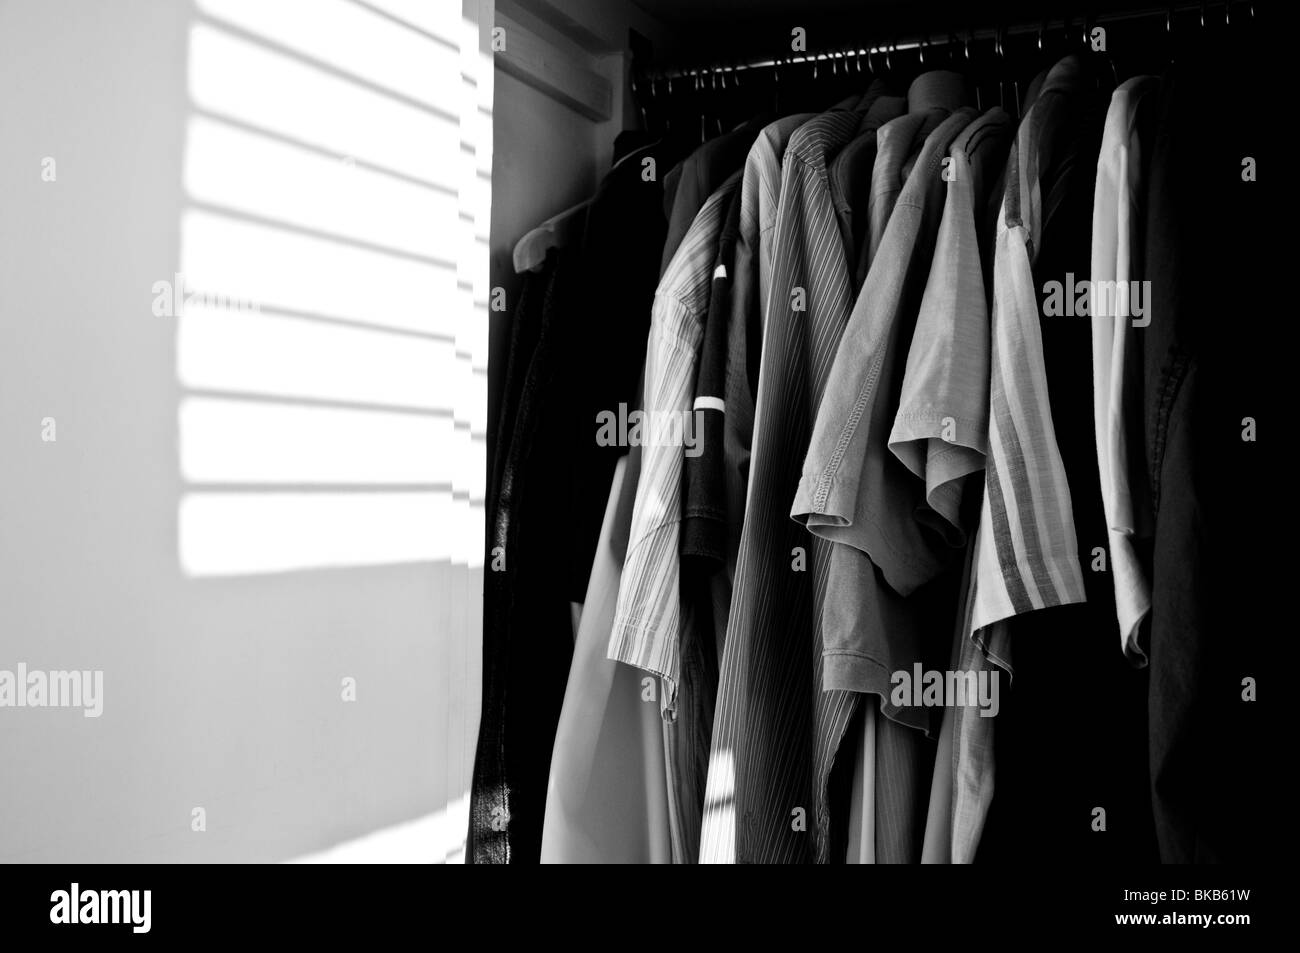 Clothes hanging up in a wardrobe, with sunlit shadow from venetian blinds.  (B&W) Stock Photo